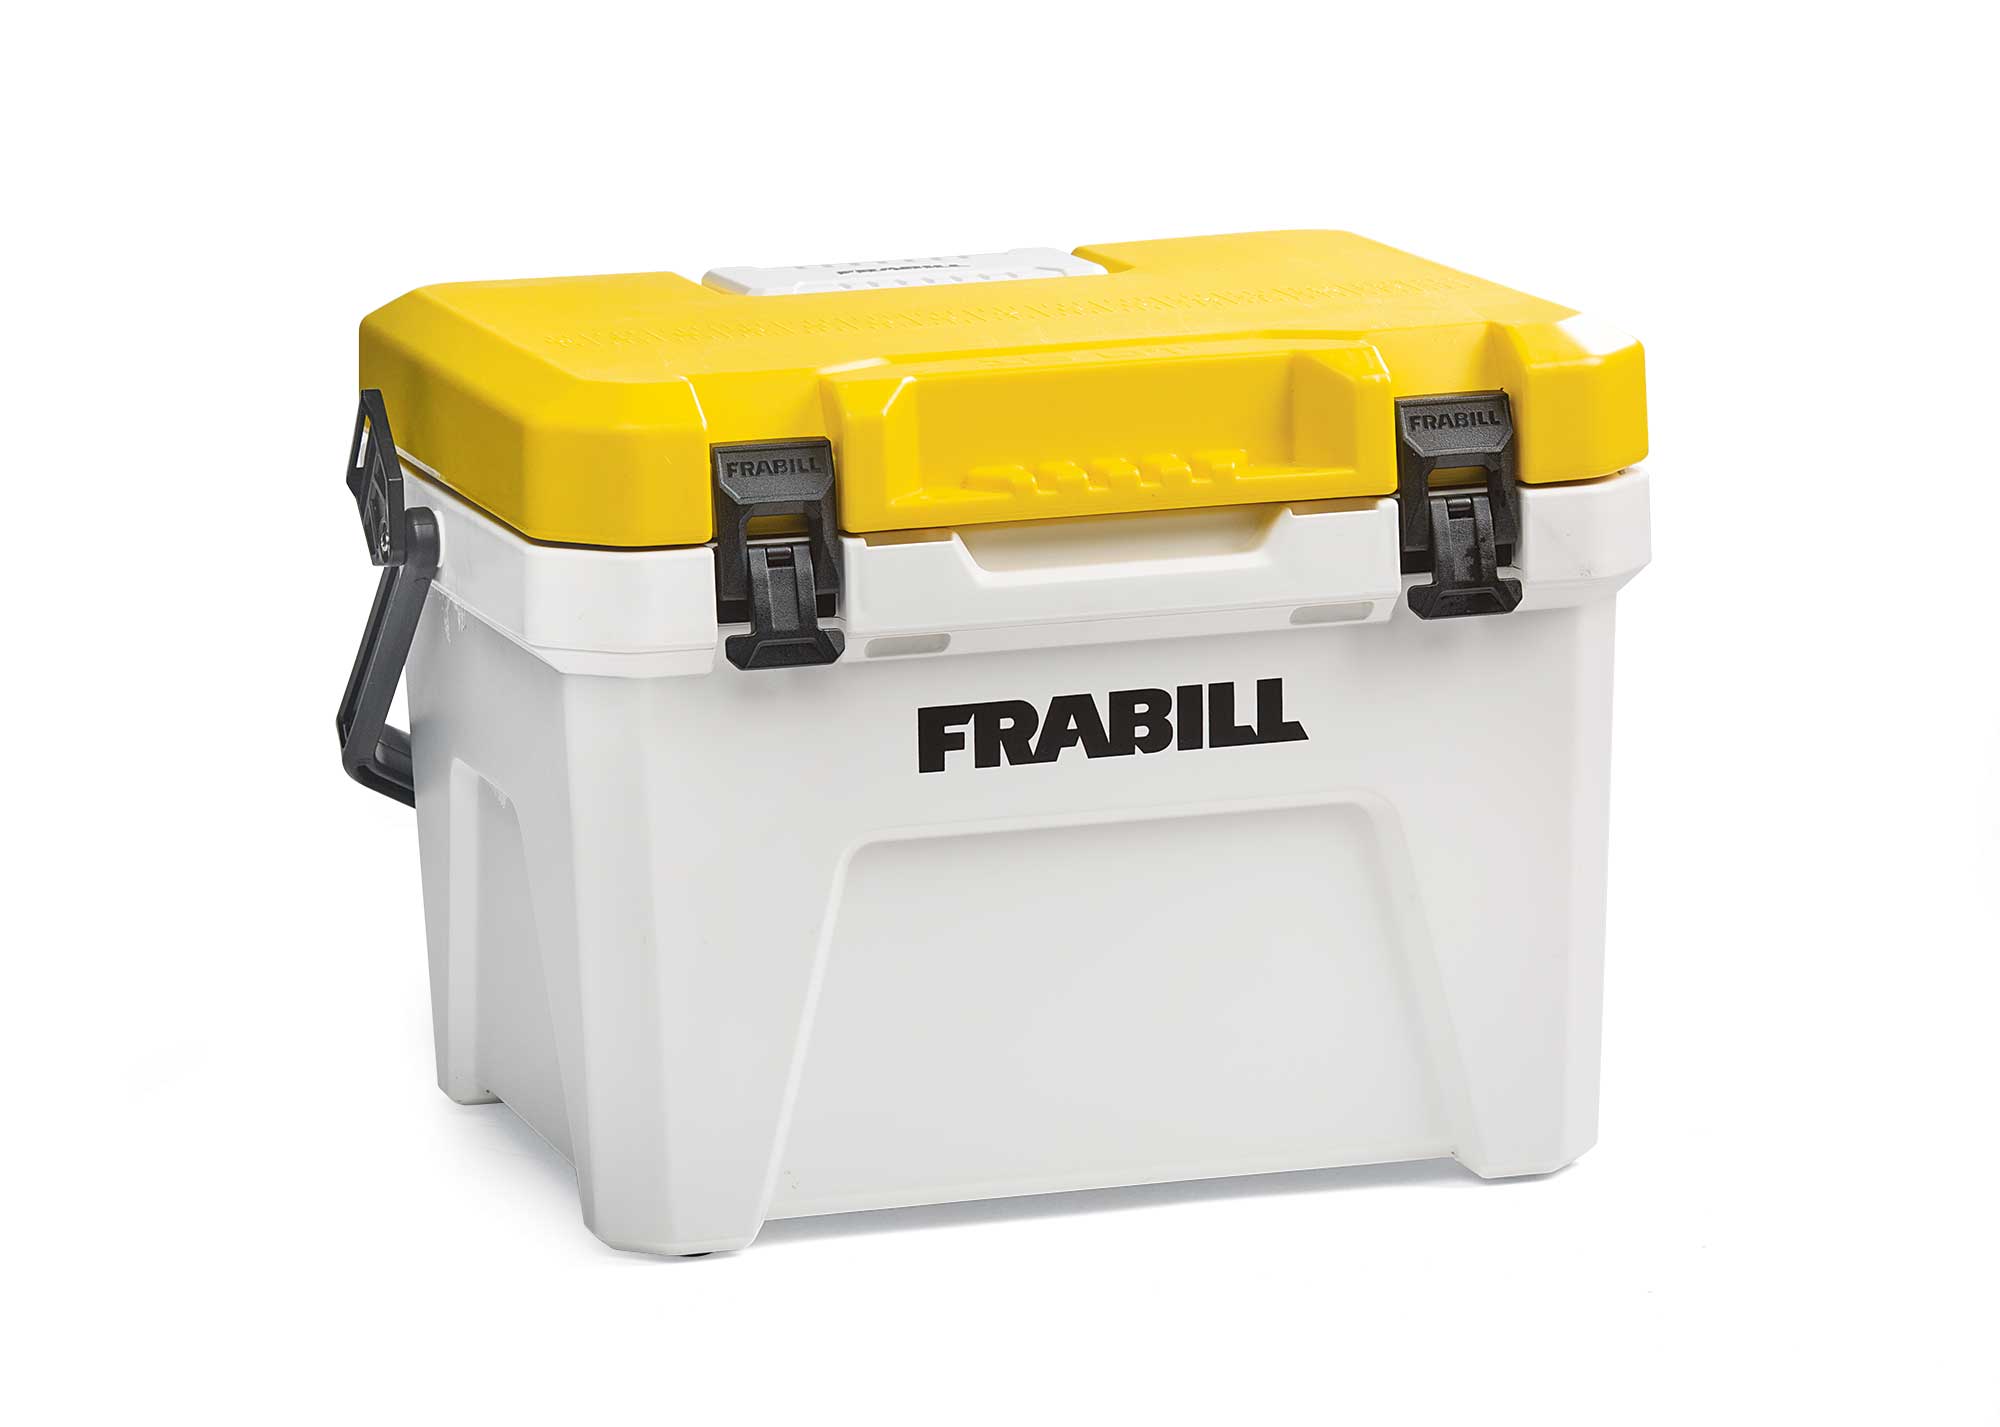 Five Expensive Coolers Tested and Compared